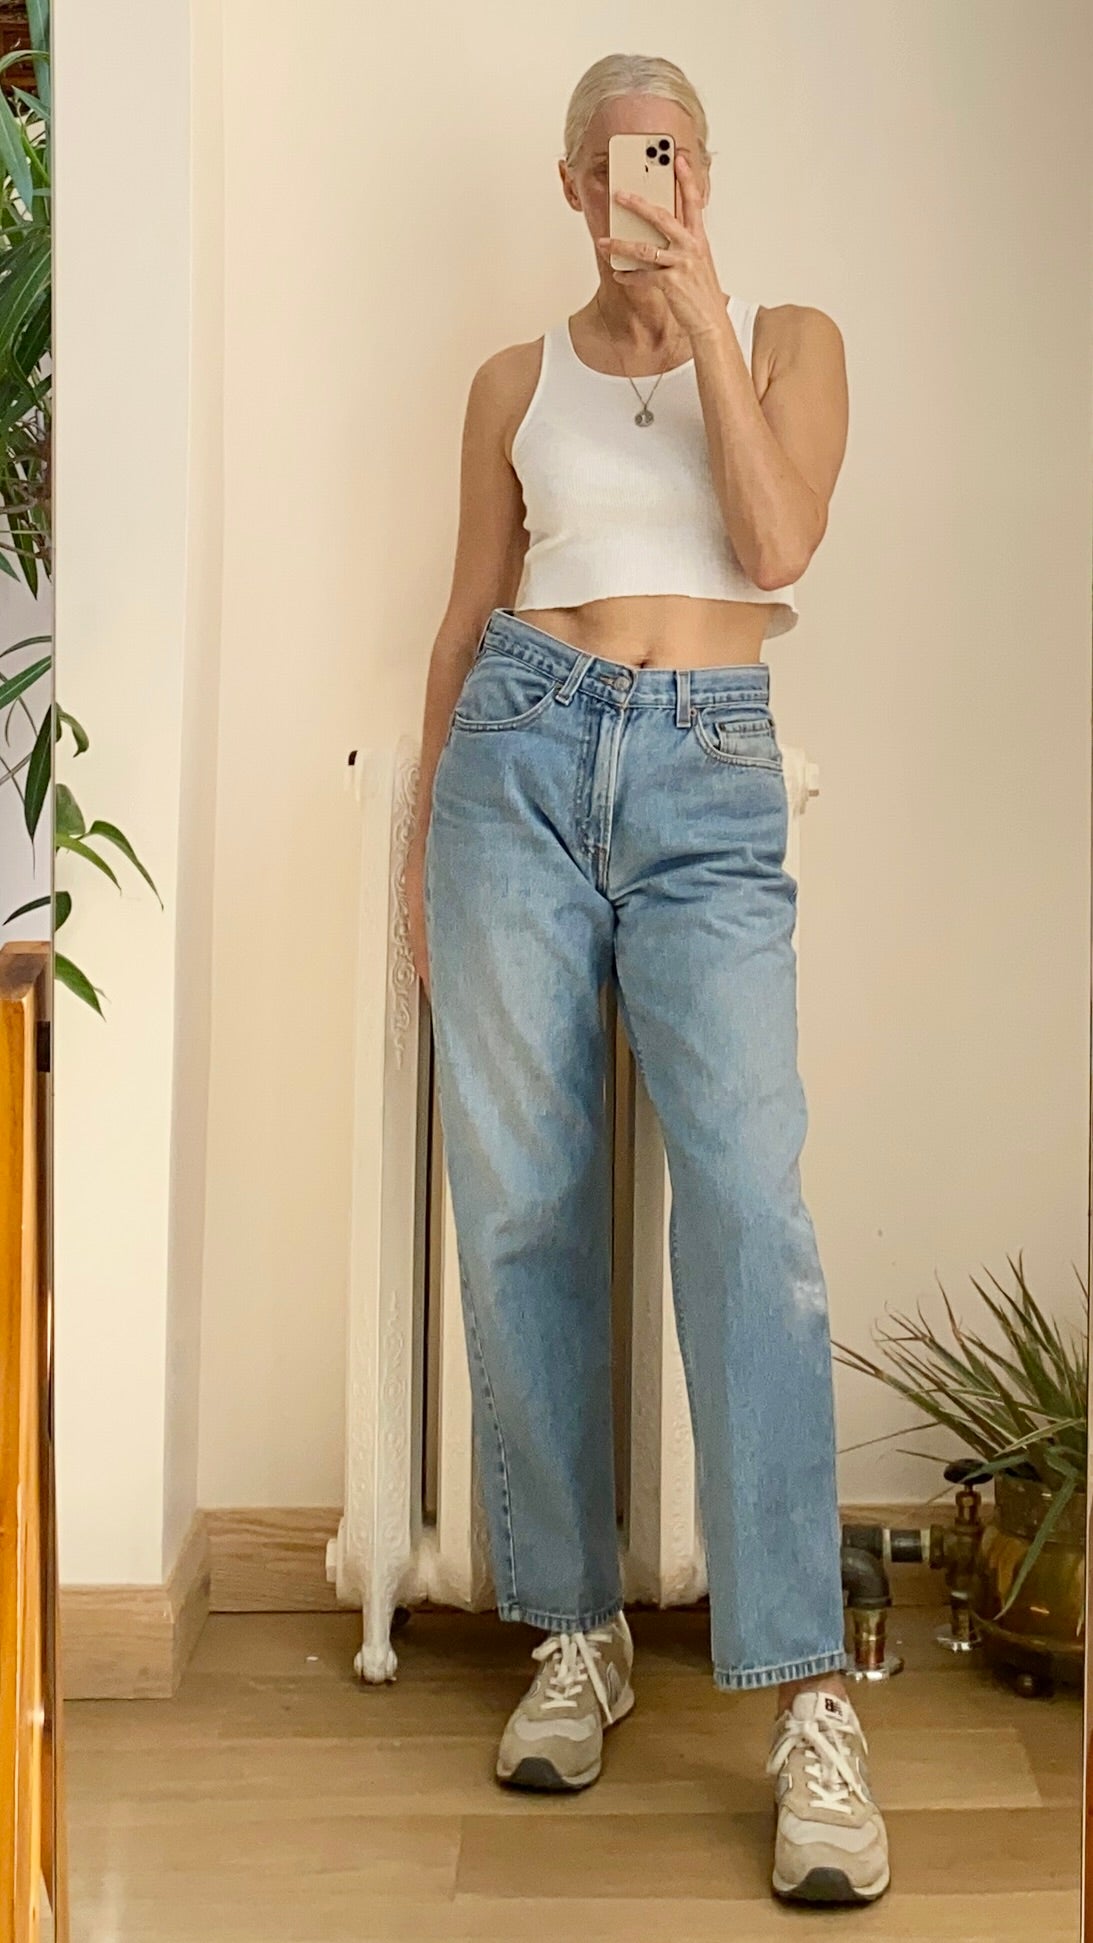 Vintage 1990s Levis 550 Red Tab Jeans Light Wash Relaxed fit size 31